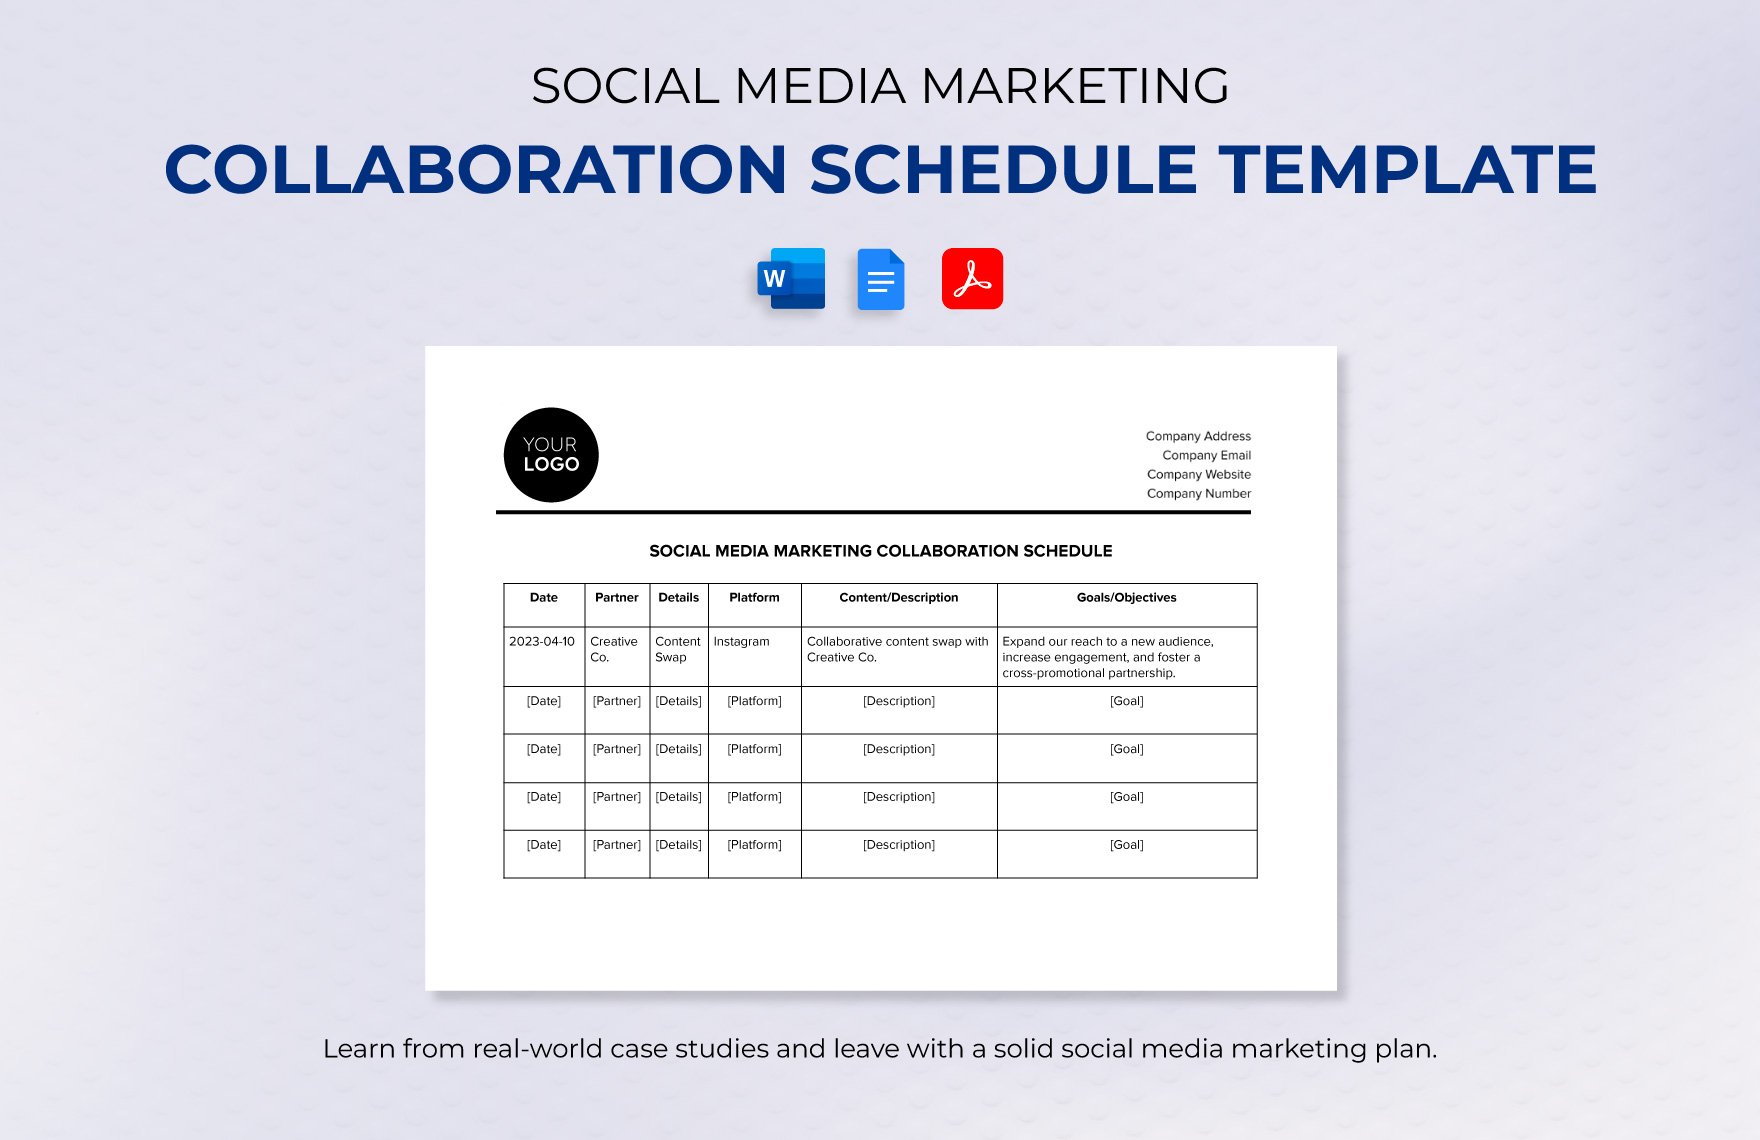 Social Media Marketing Collaboration Schedule Template in Word, Google Docs, PDF